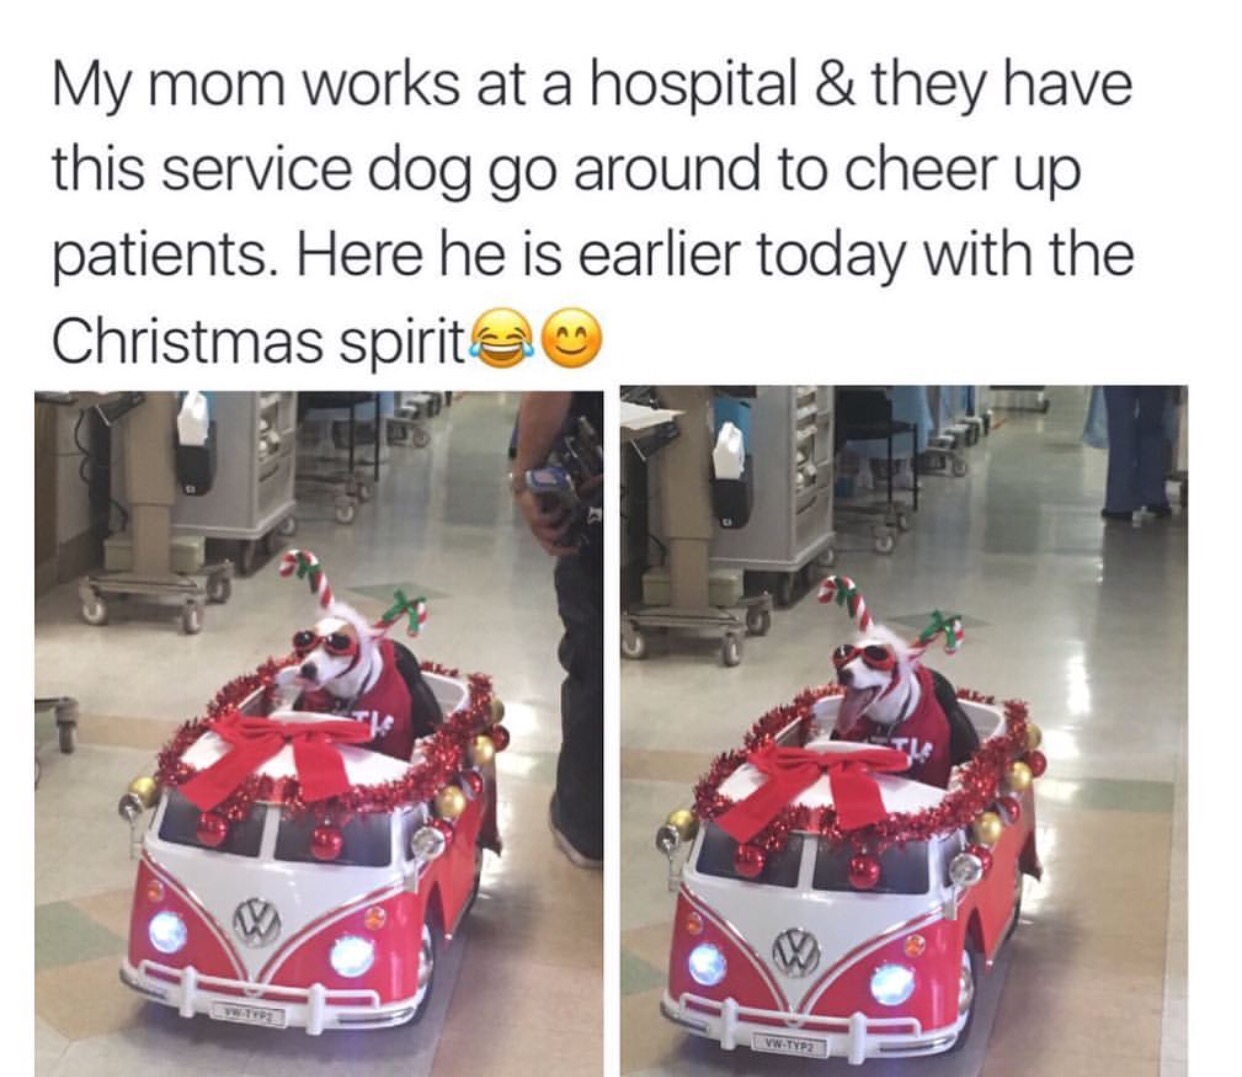 Dog - My mom works at a hospital & they have this service dog go around to cheer up patients. Here he is earlier today with the Christmas spirit Vw TYP2